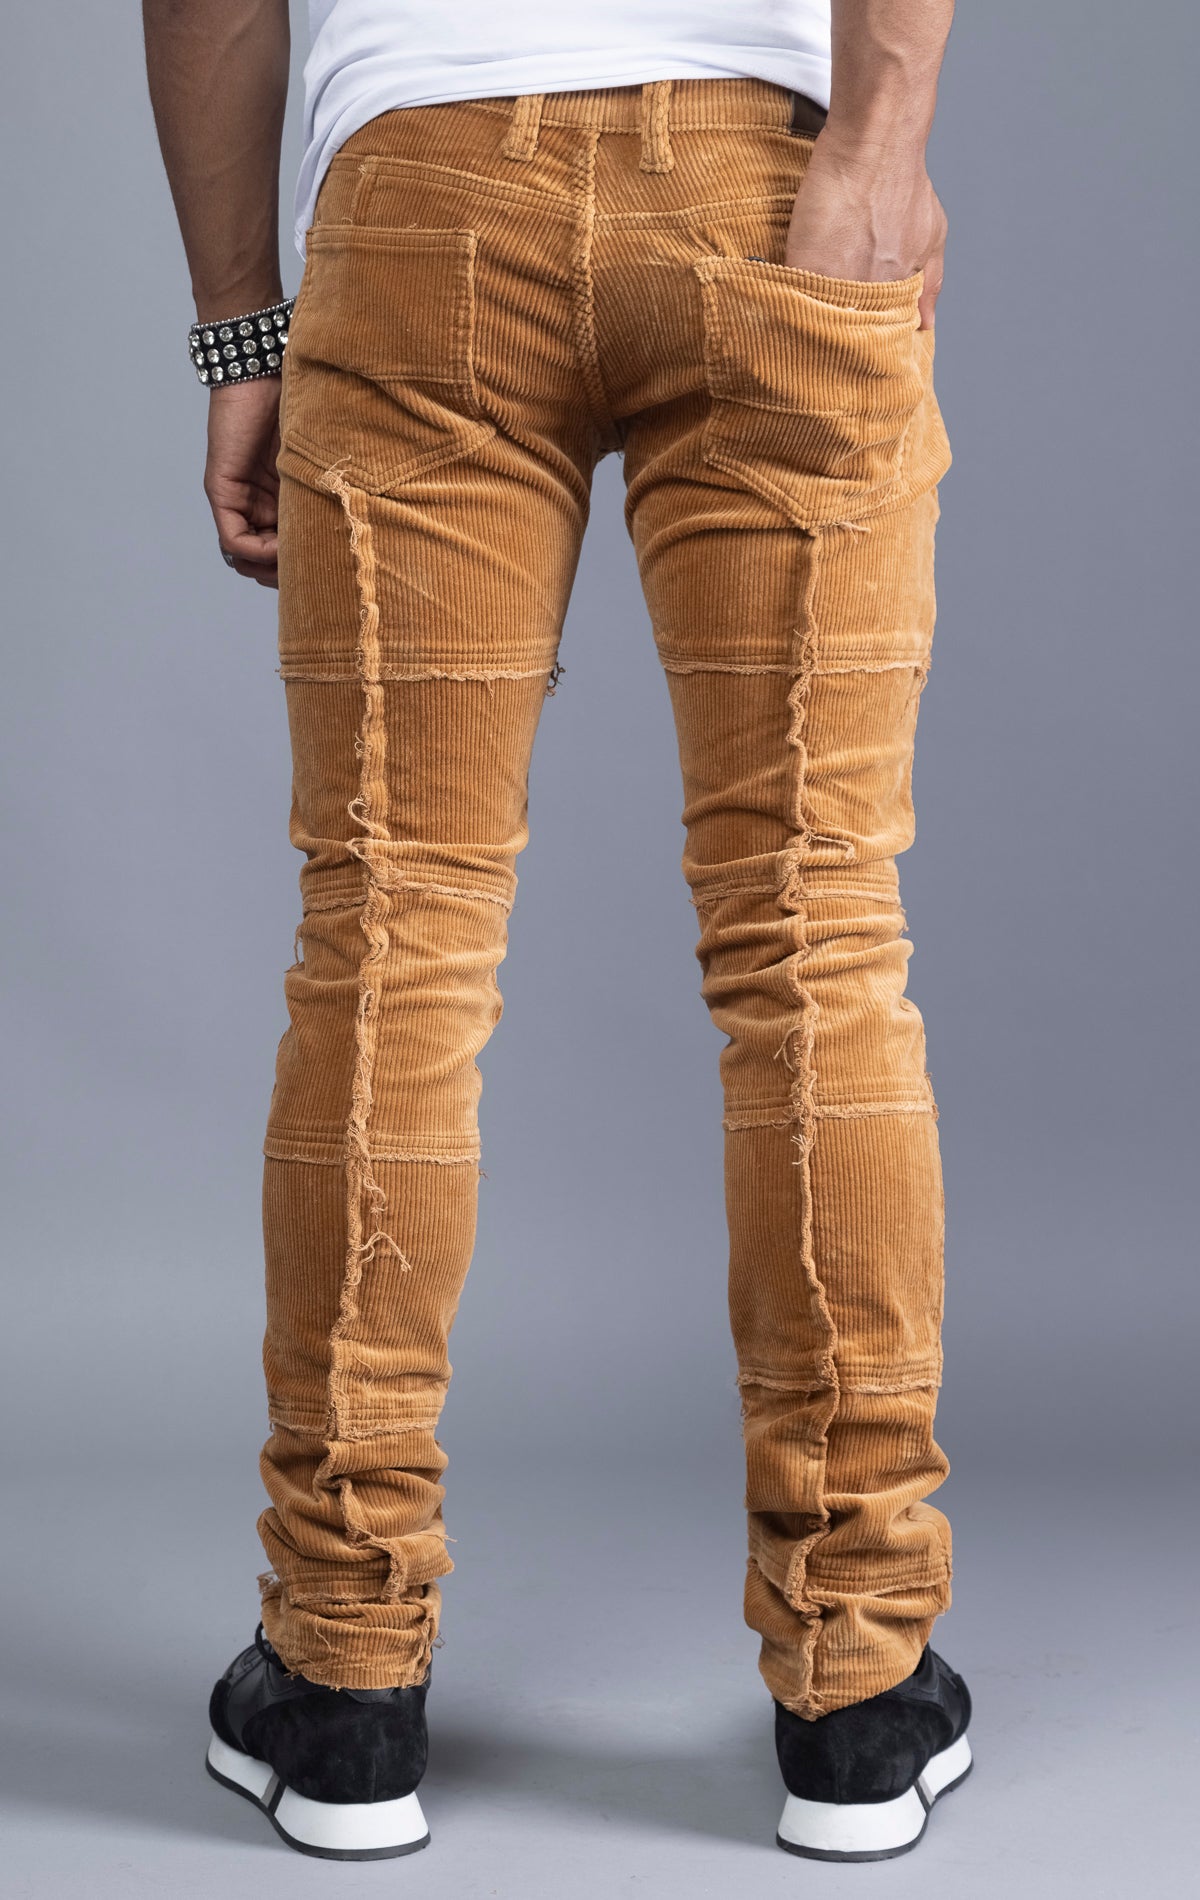 Men's camel corduroy pants with stacked legs, cut-and-sew details, and raw hems.